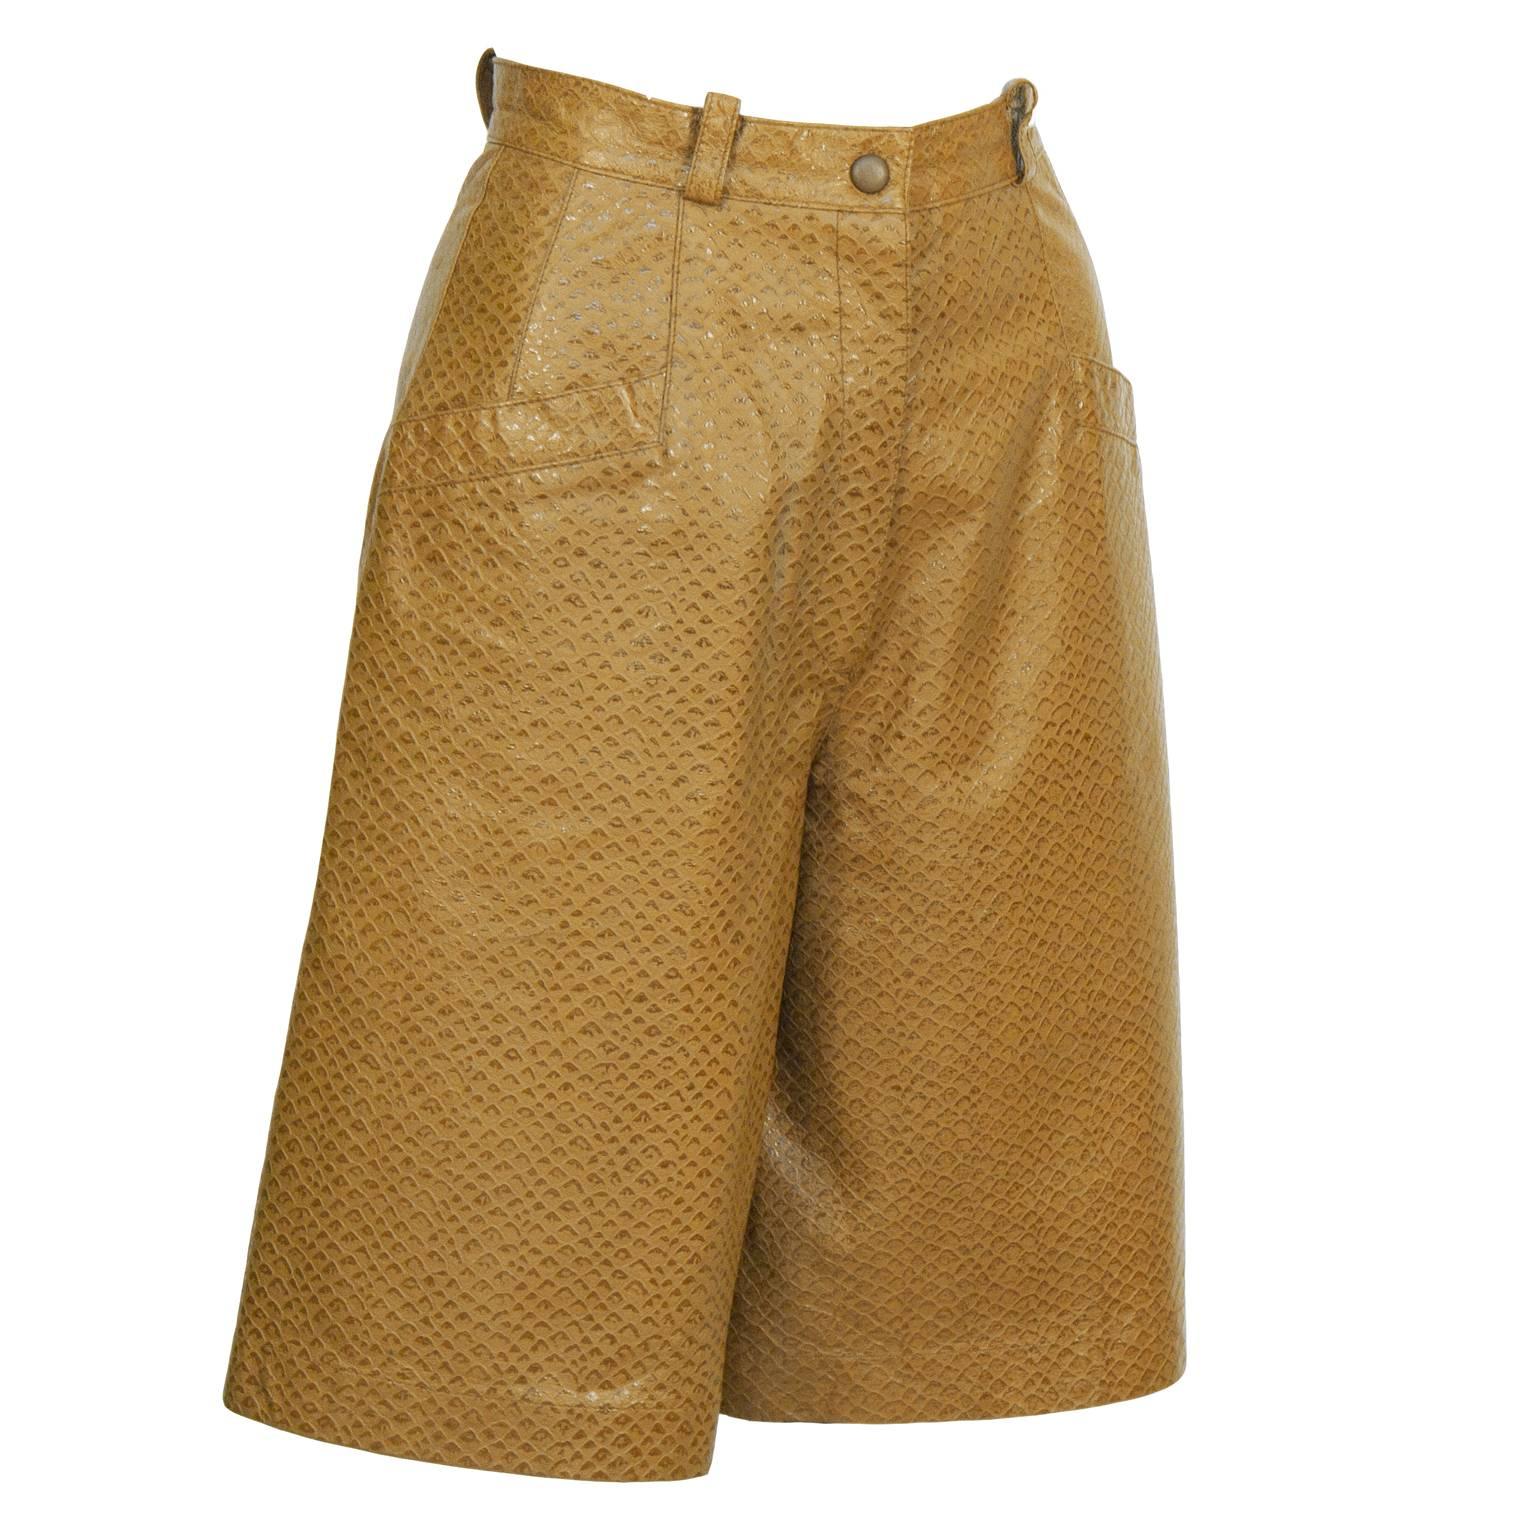 Krizia tan pigskin culottes from the 1980's. The cropped faux python pattern culottes feature a waistband with belt loops, two band pockets at the hips and closes with a zip fly. Interior is lined in tan chiffon. Excellent condition. Fits like a US